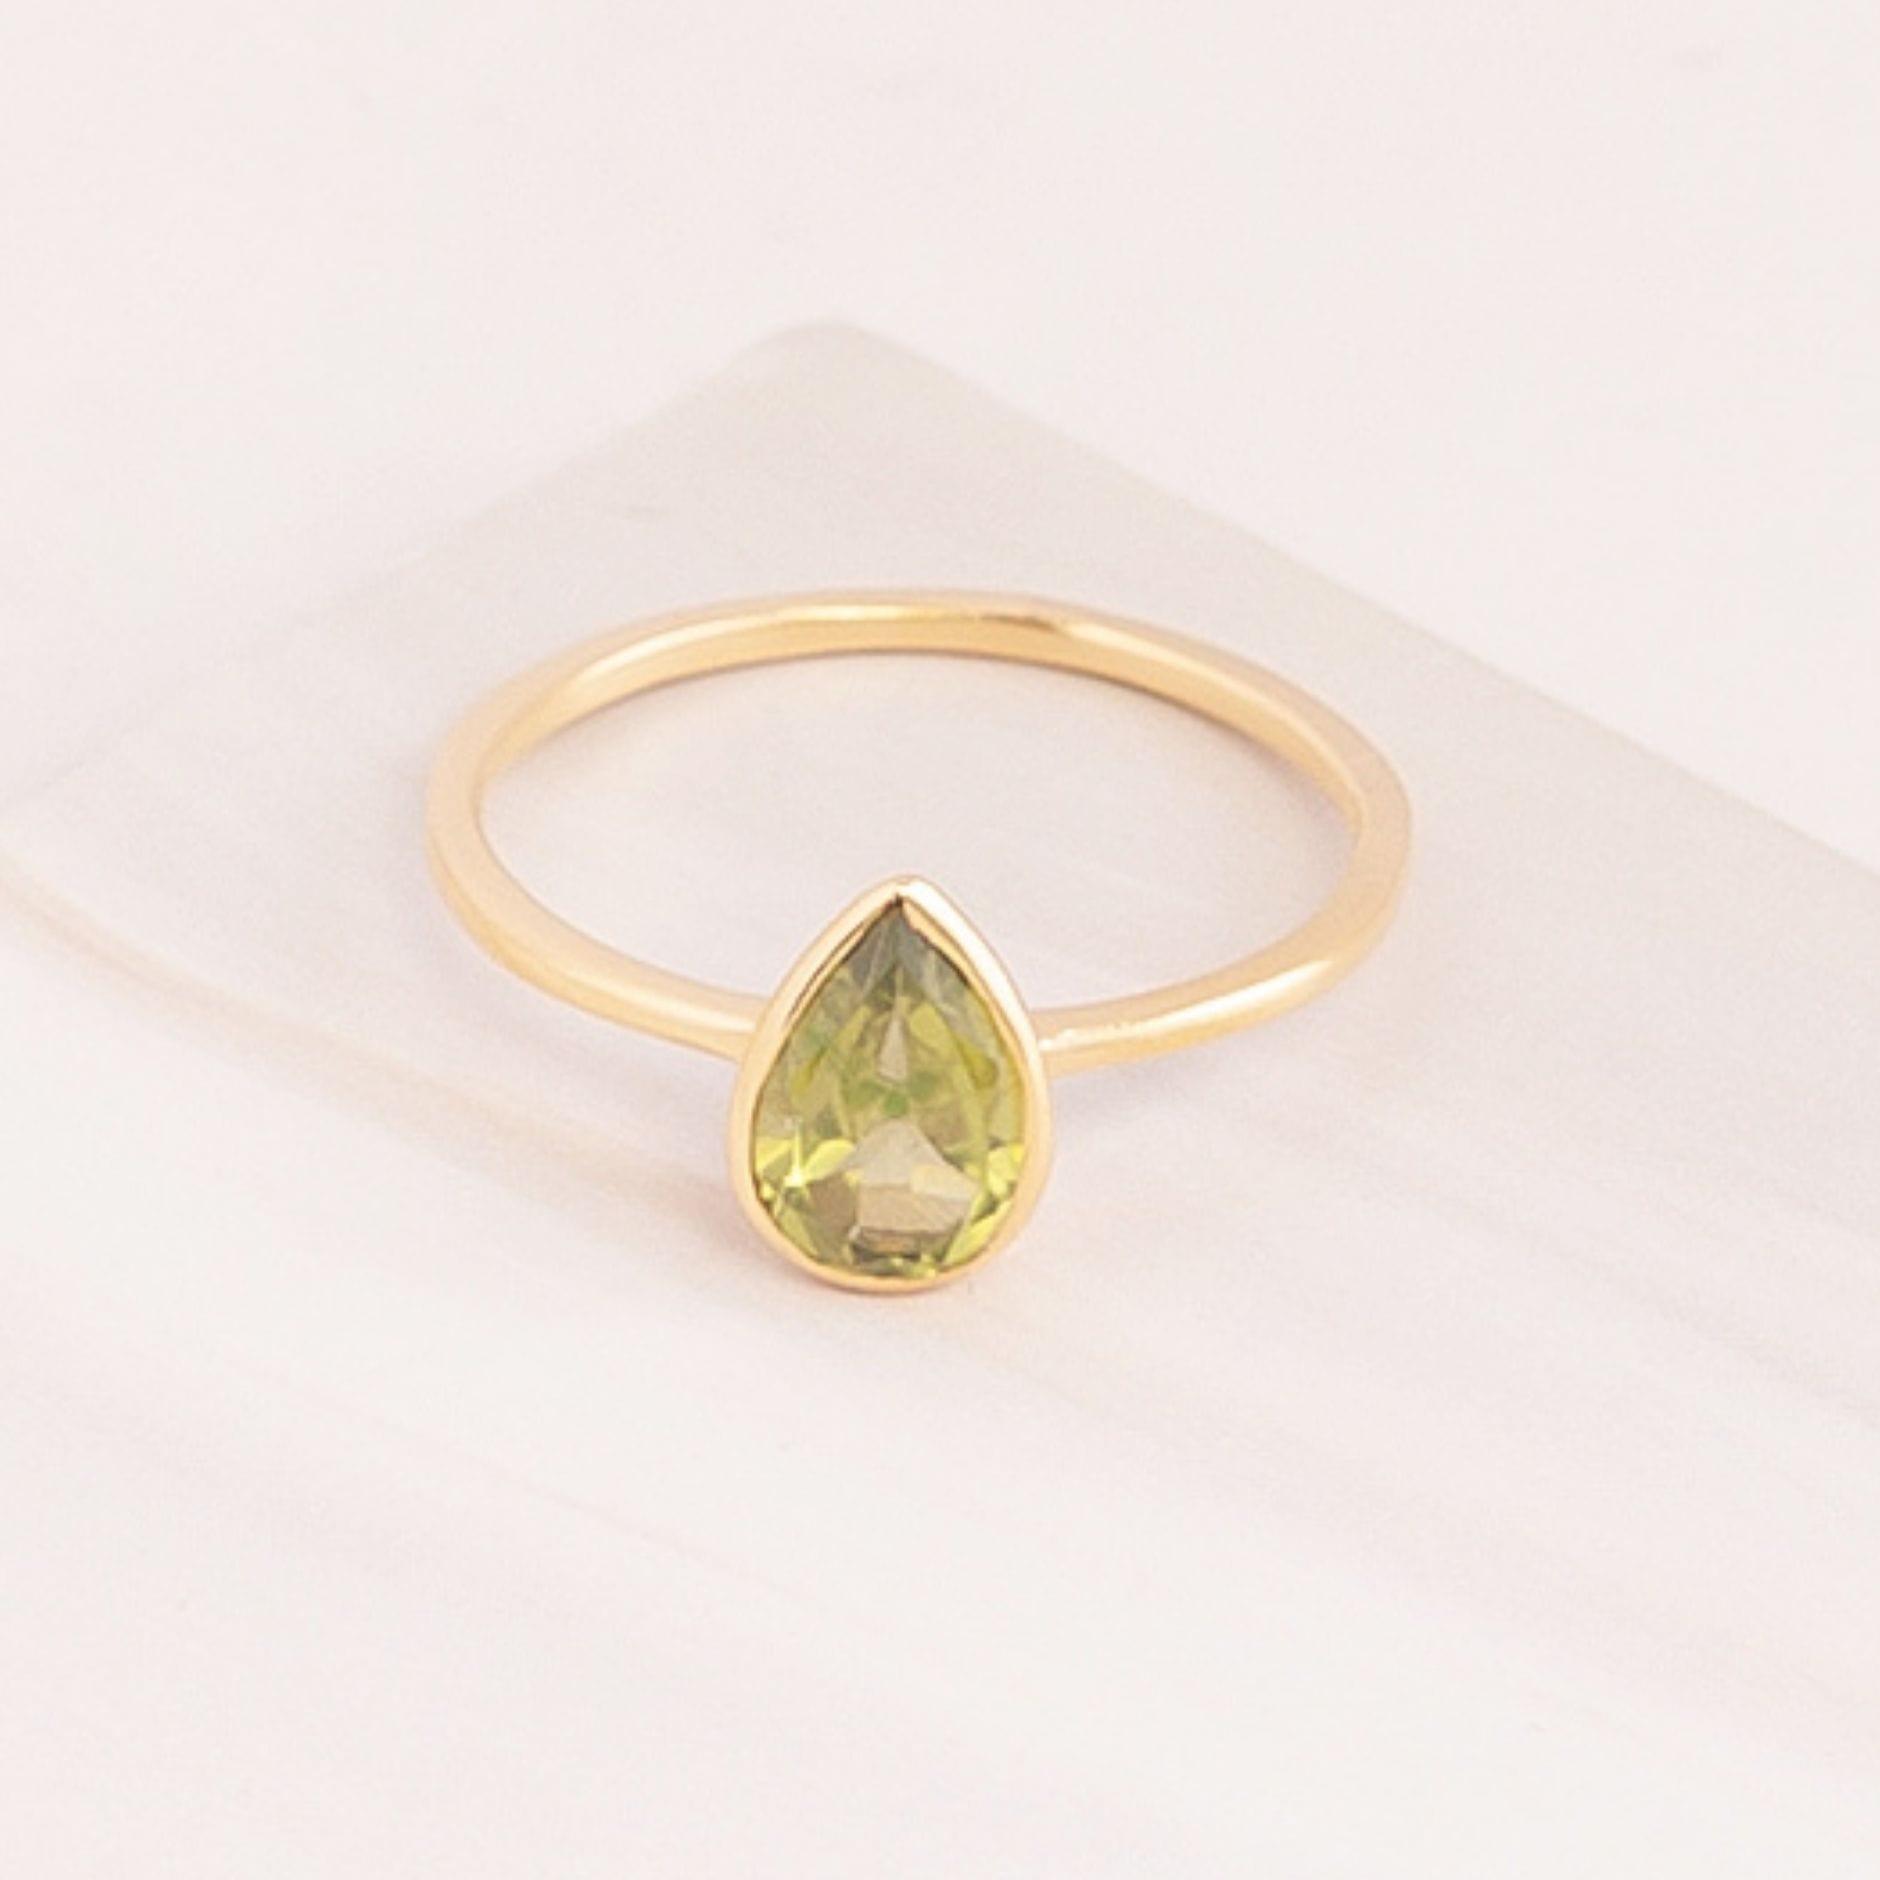 Emblem Jewelry Rings Green Peridot / Pear Signature Candy Gemstone Stack Rings (Ring Size 7)